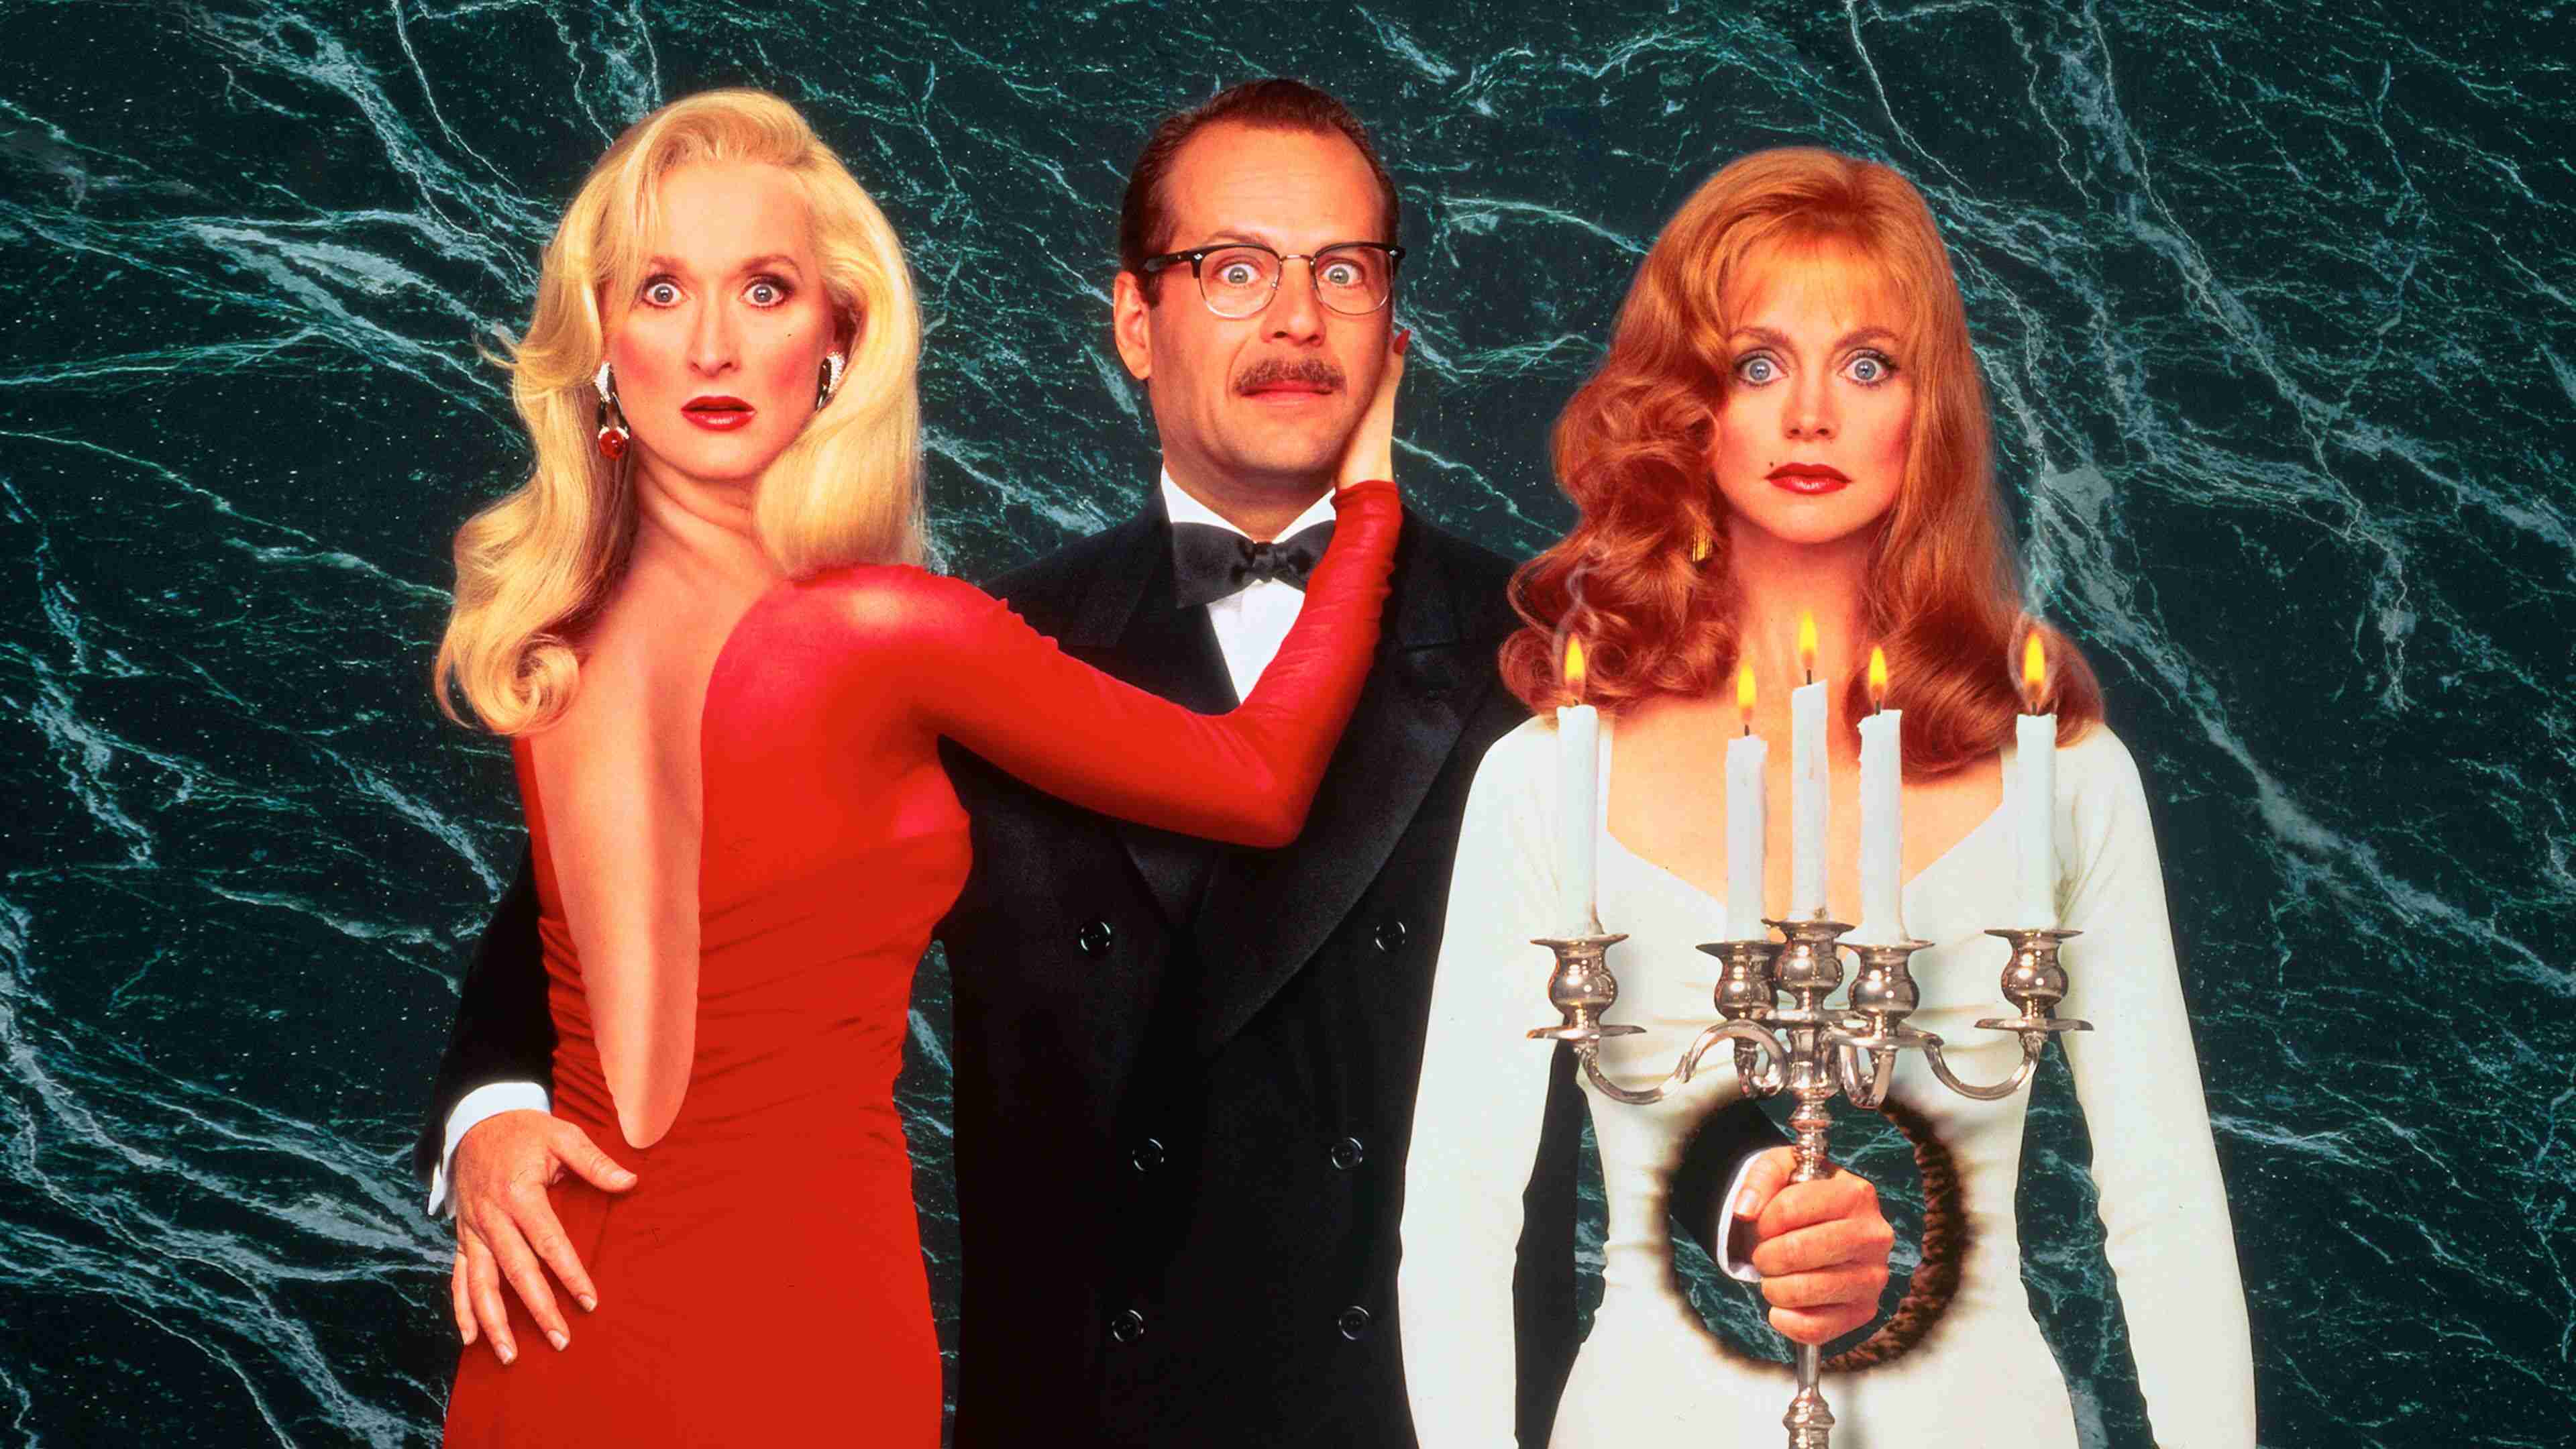 Celebrating the icons - Lisle Von Rhuman from 'Death Becomes Her'